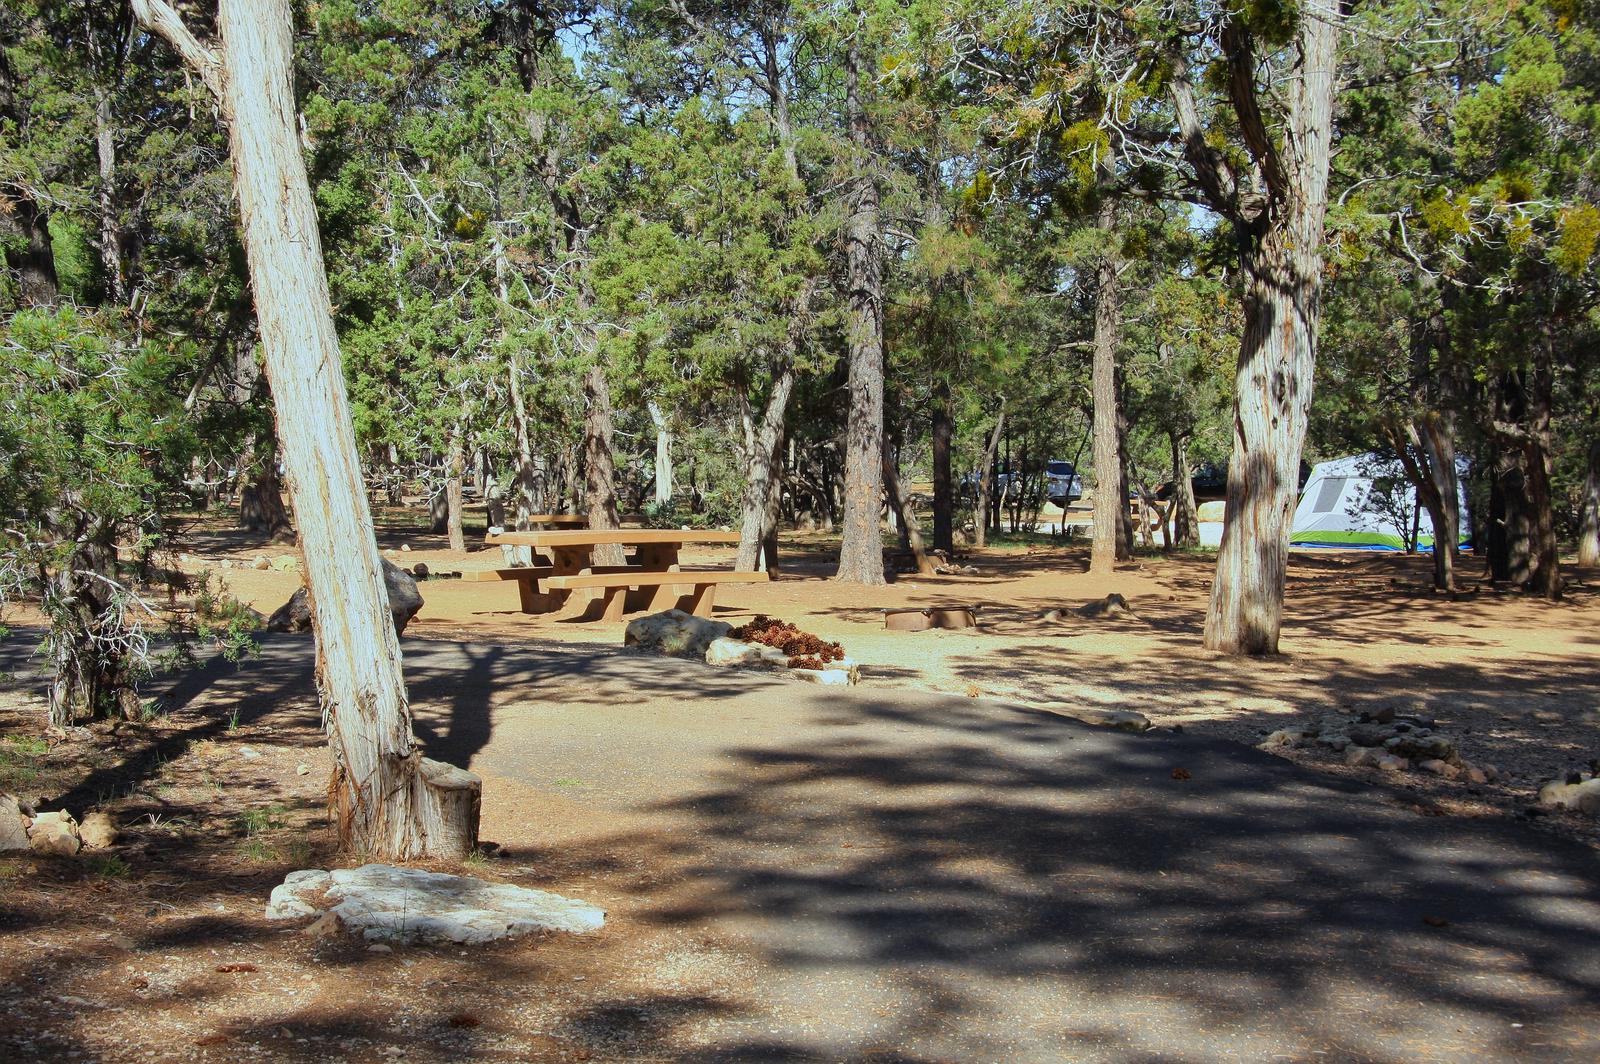 Picnic table, fire pit, and parking spot, Mather CampgroundPicnic table, fire pit, and parking spot for Oak Loop 214, Mather Campground